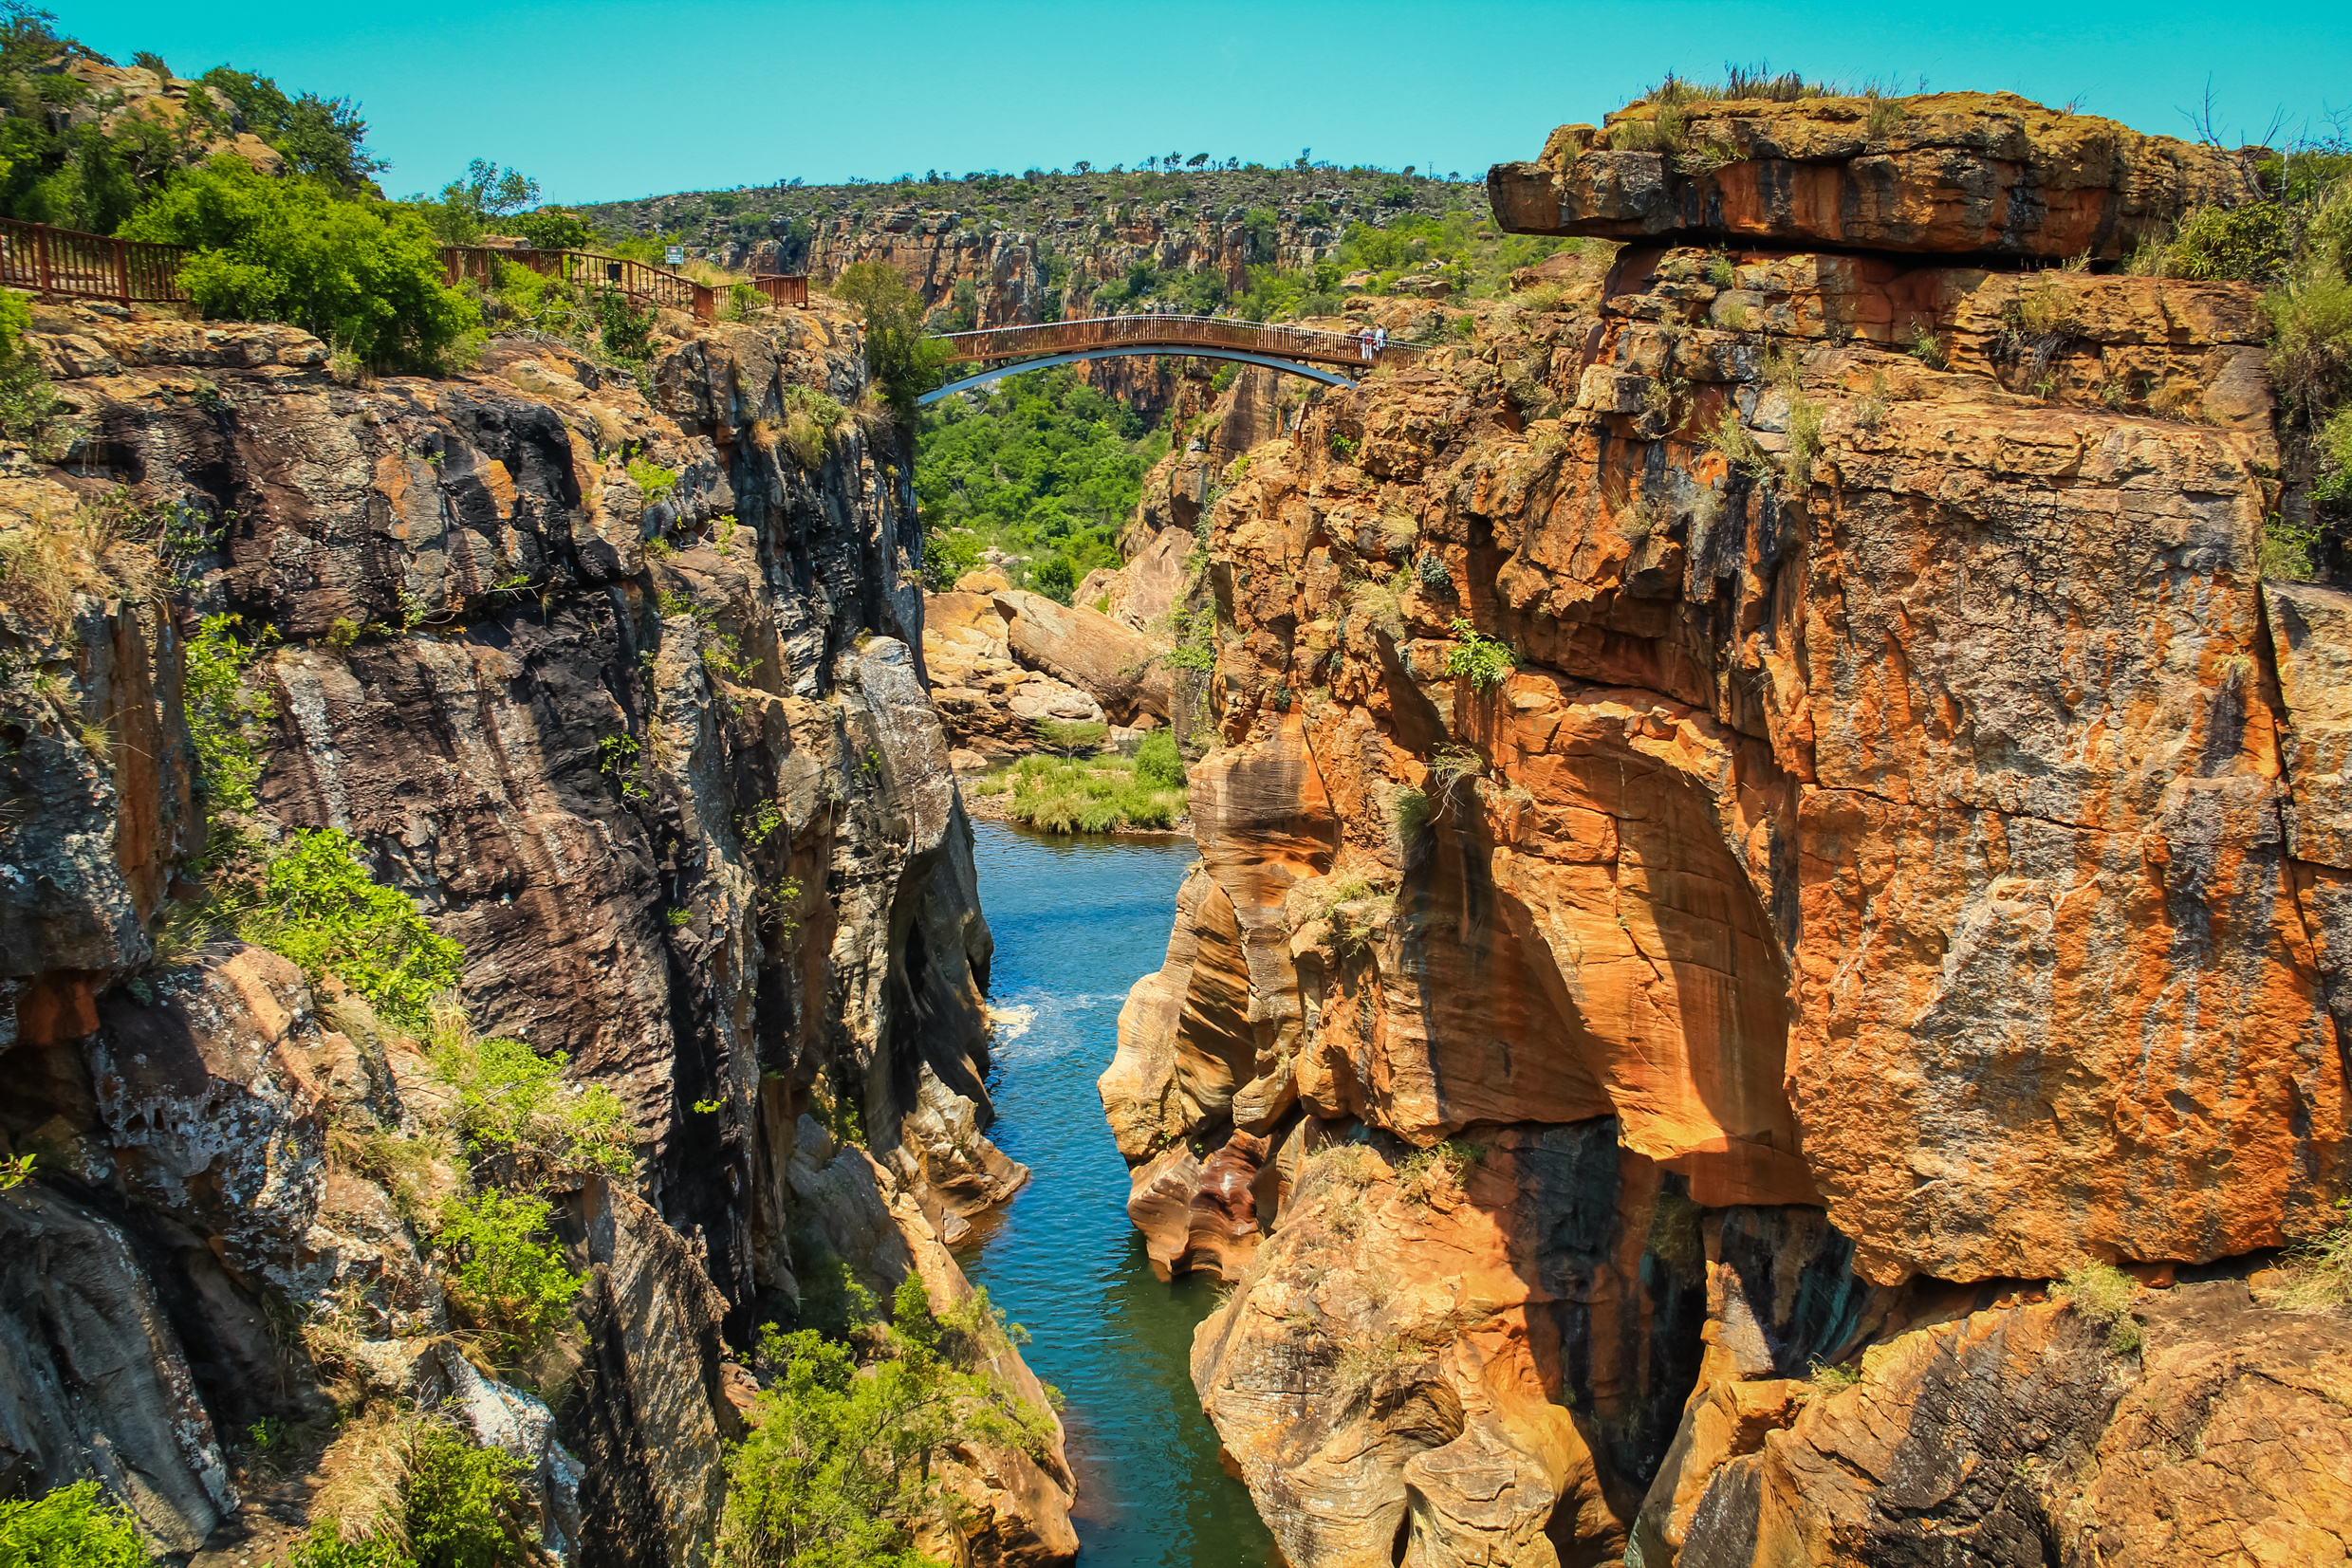 Bridge over canyon at Blyde River, South Africa